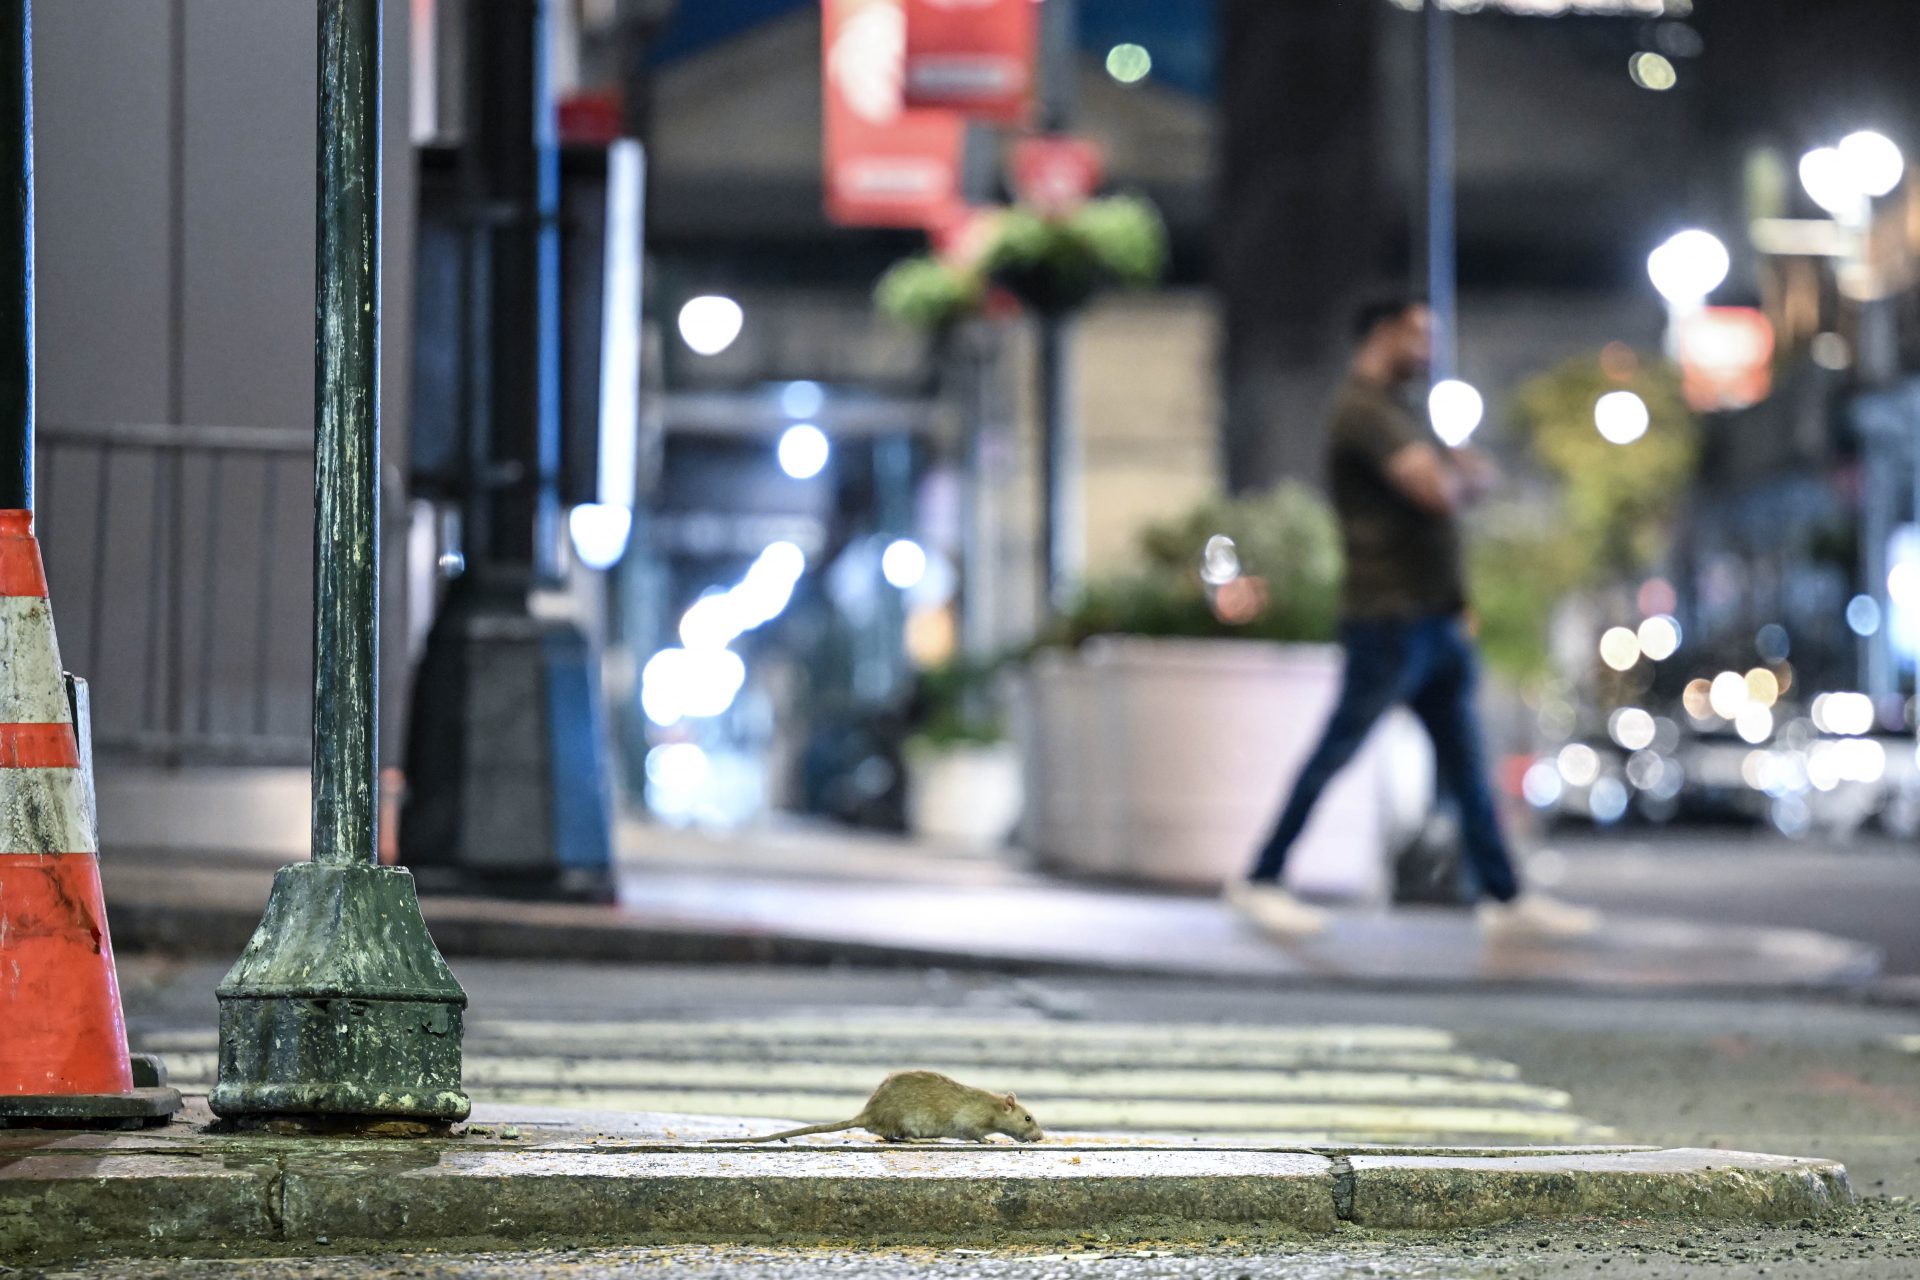 Urban explorers in search of rats